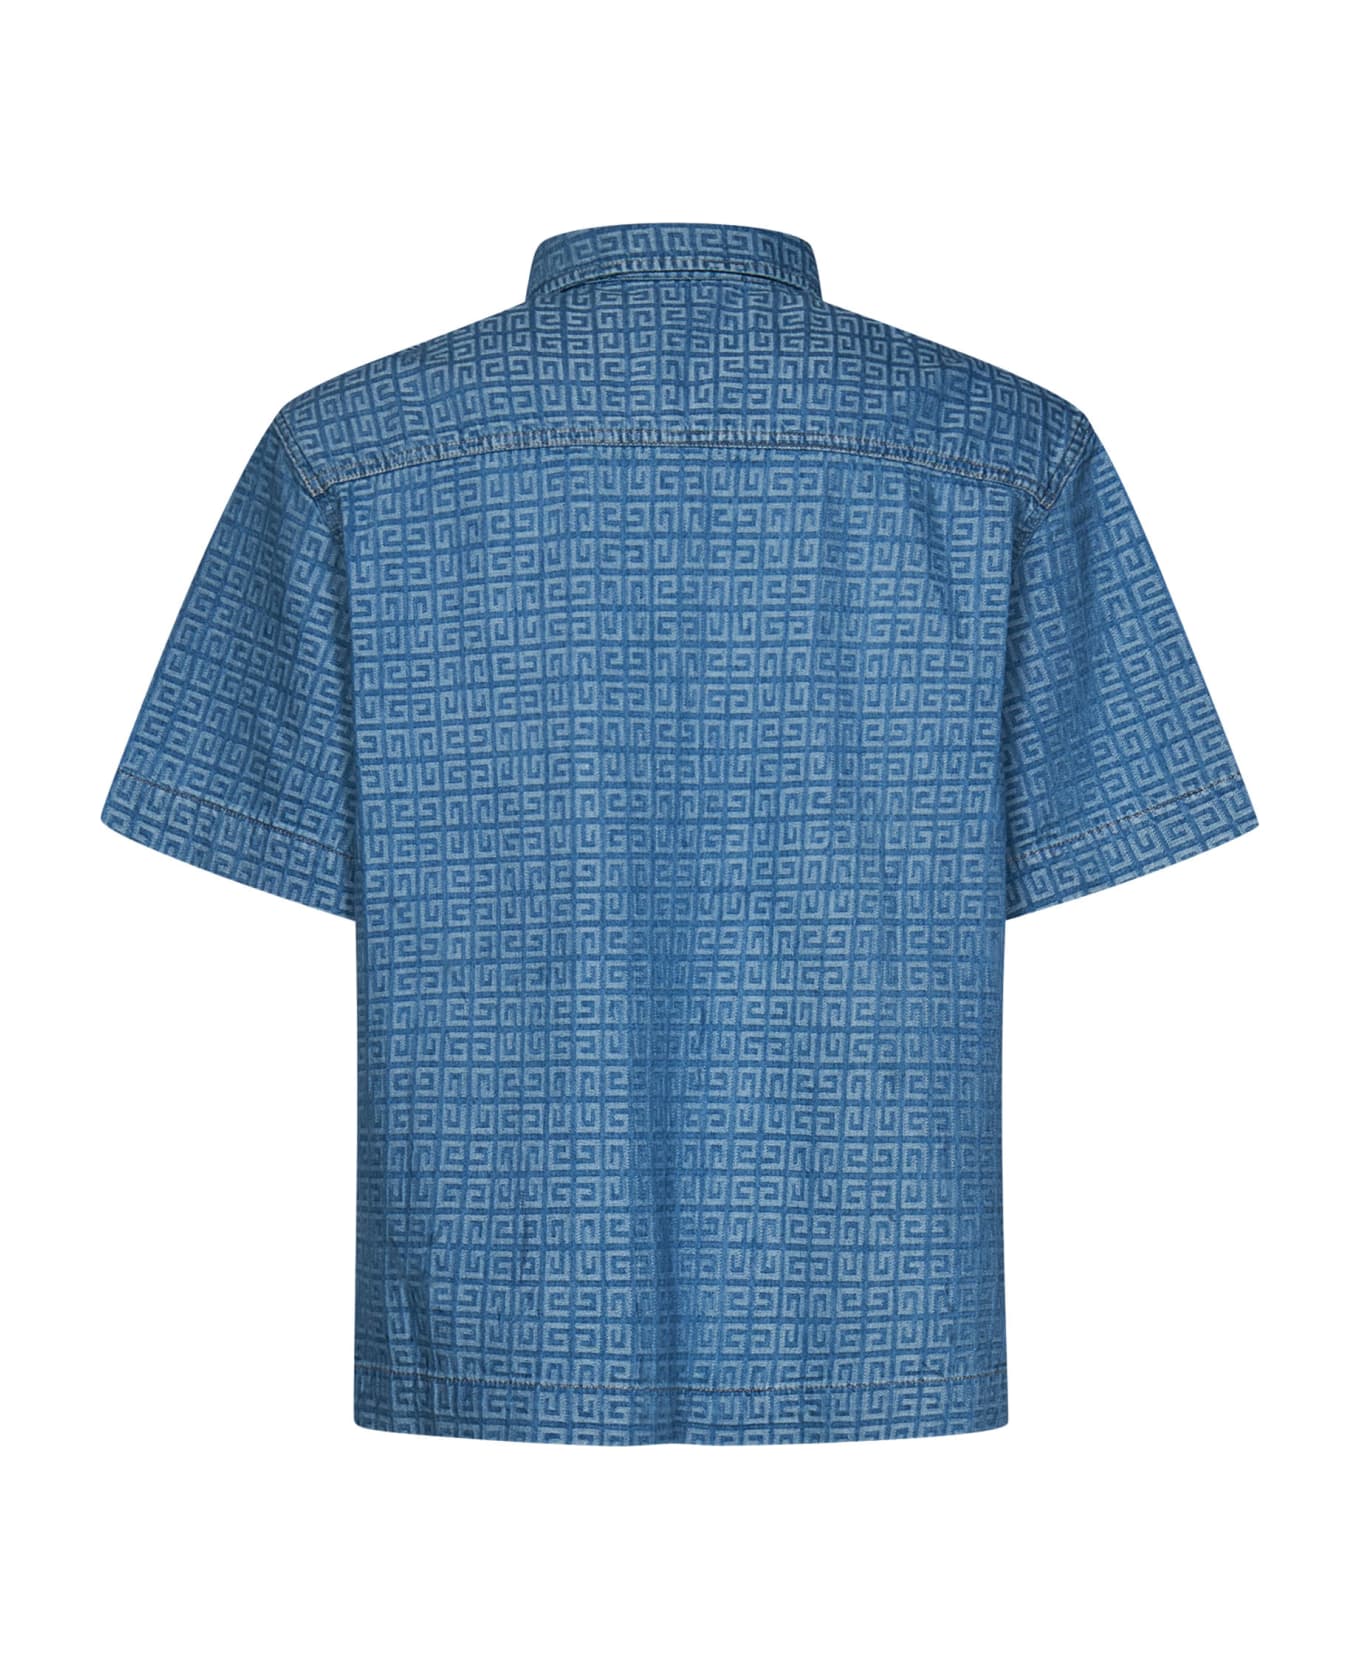 Givenchy Shirt - Clear Blue